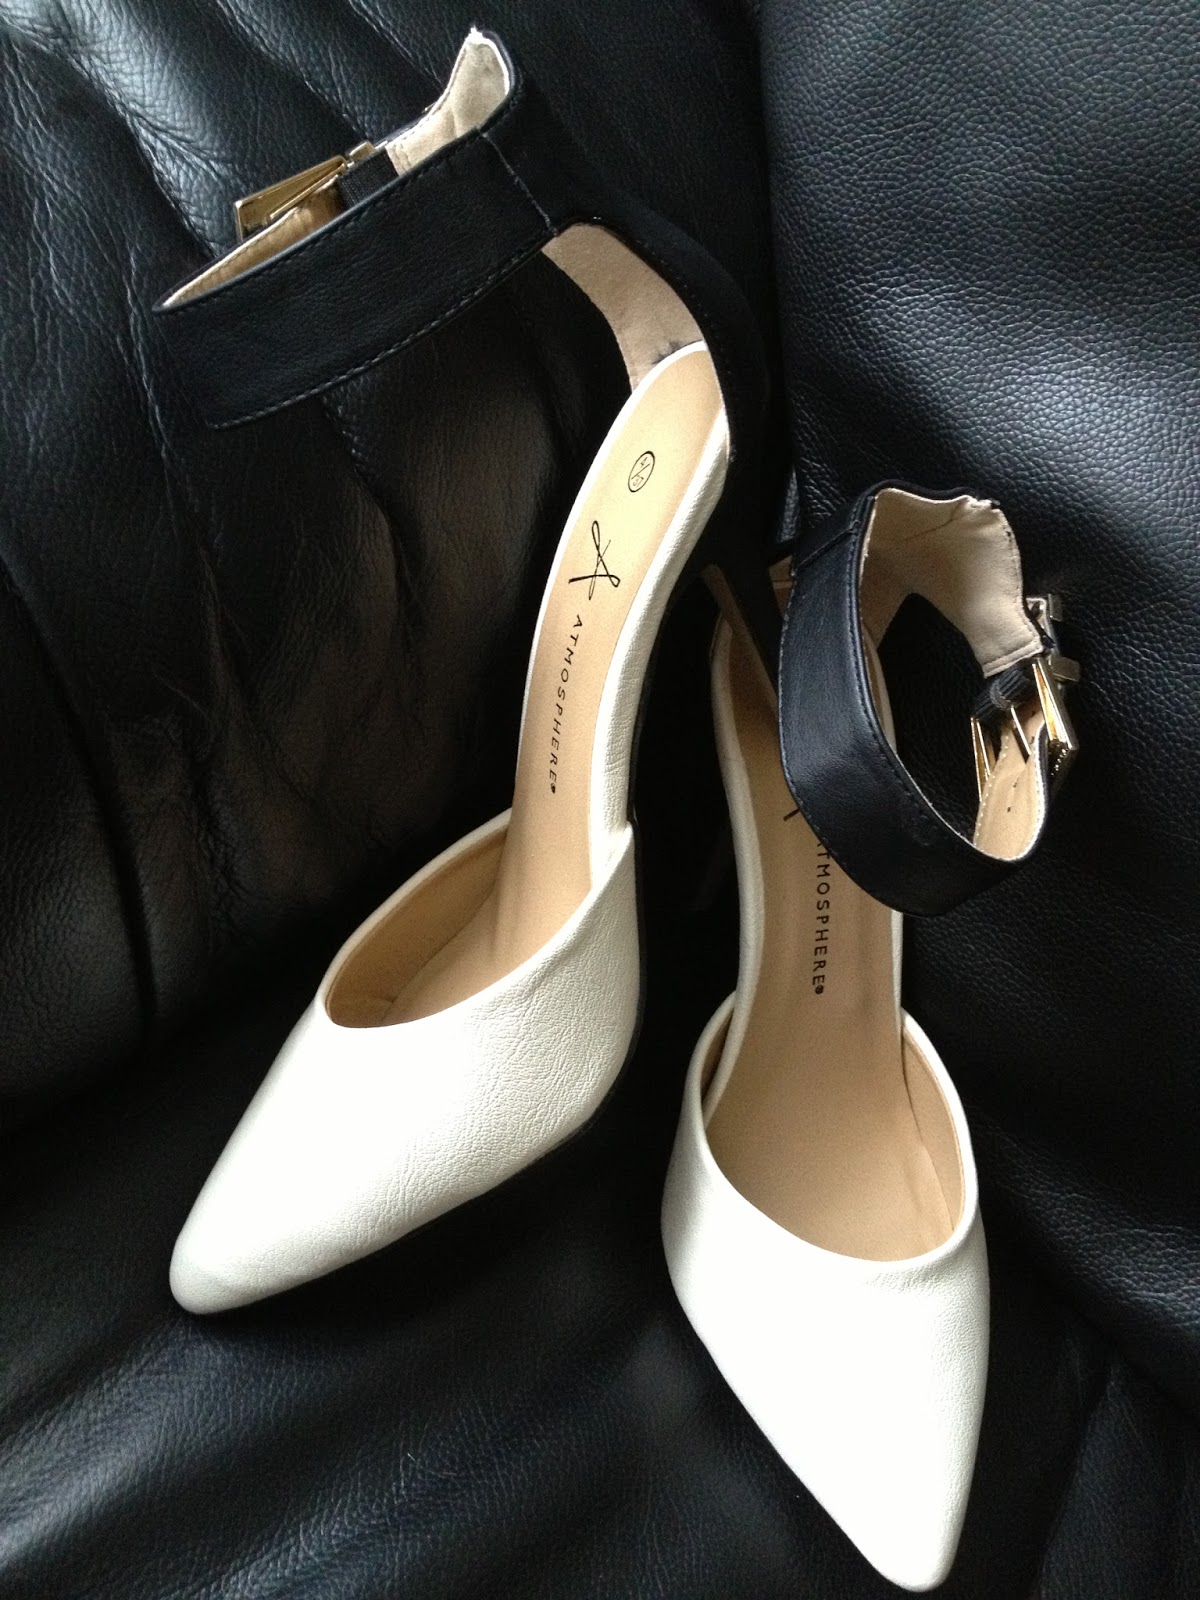 PRODUCT REVIEW: Monochrome Heels from Primark | STYLED INTO FASHION